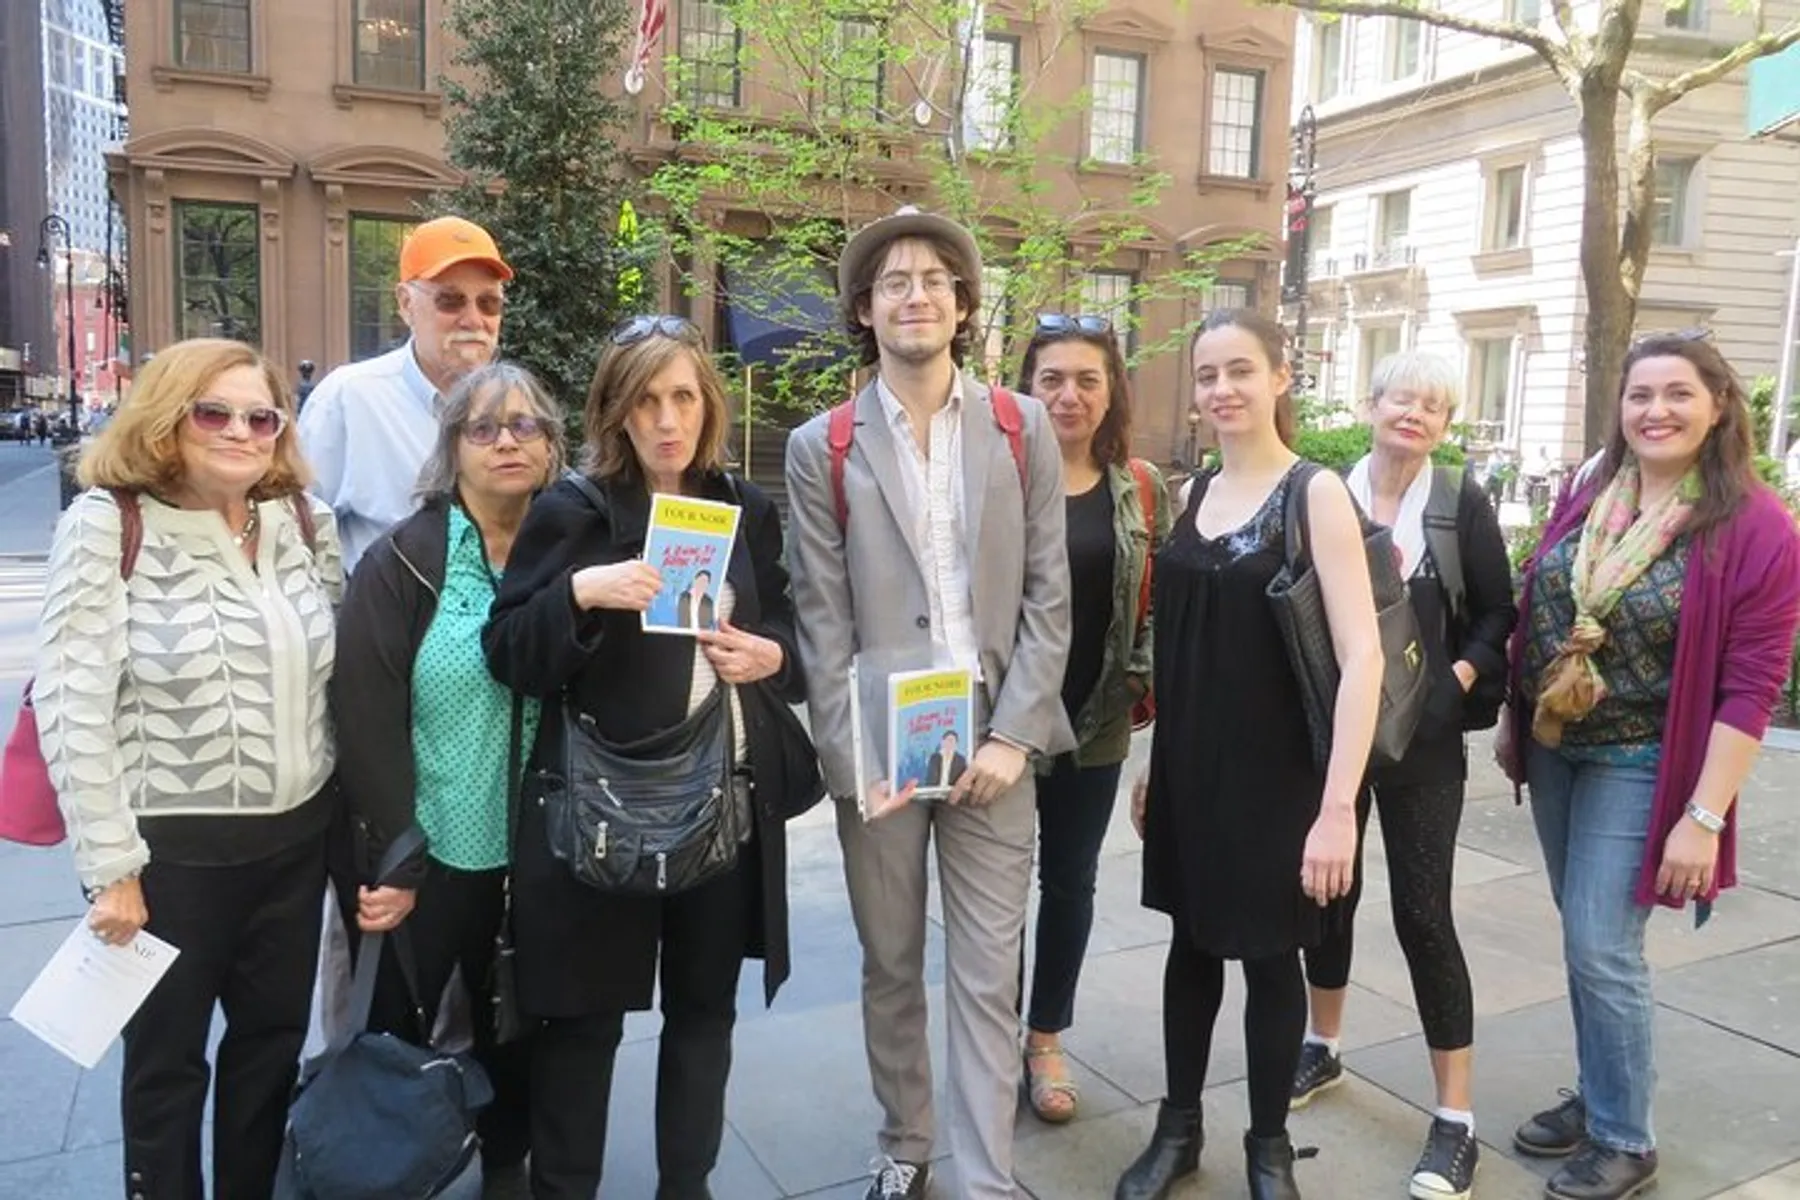 A group of people pose for a photo on a city street, two of whom are holding books with visible covers.